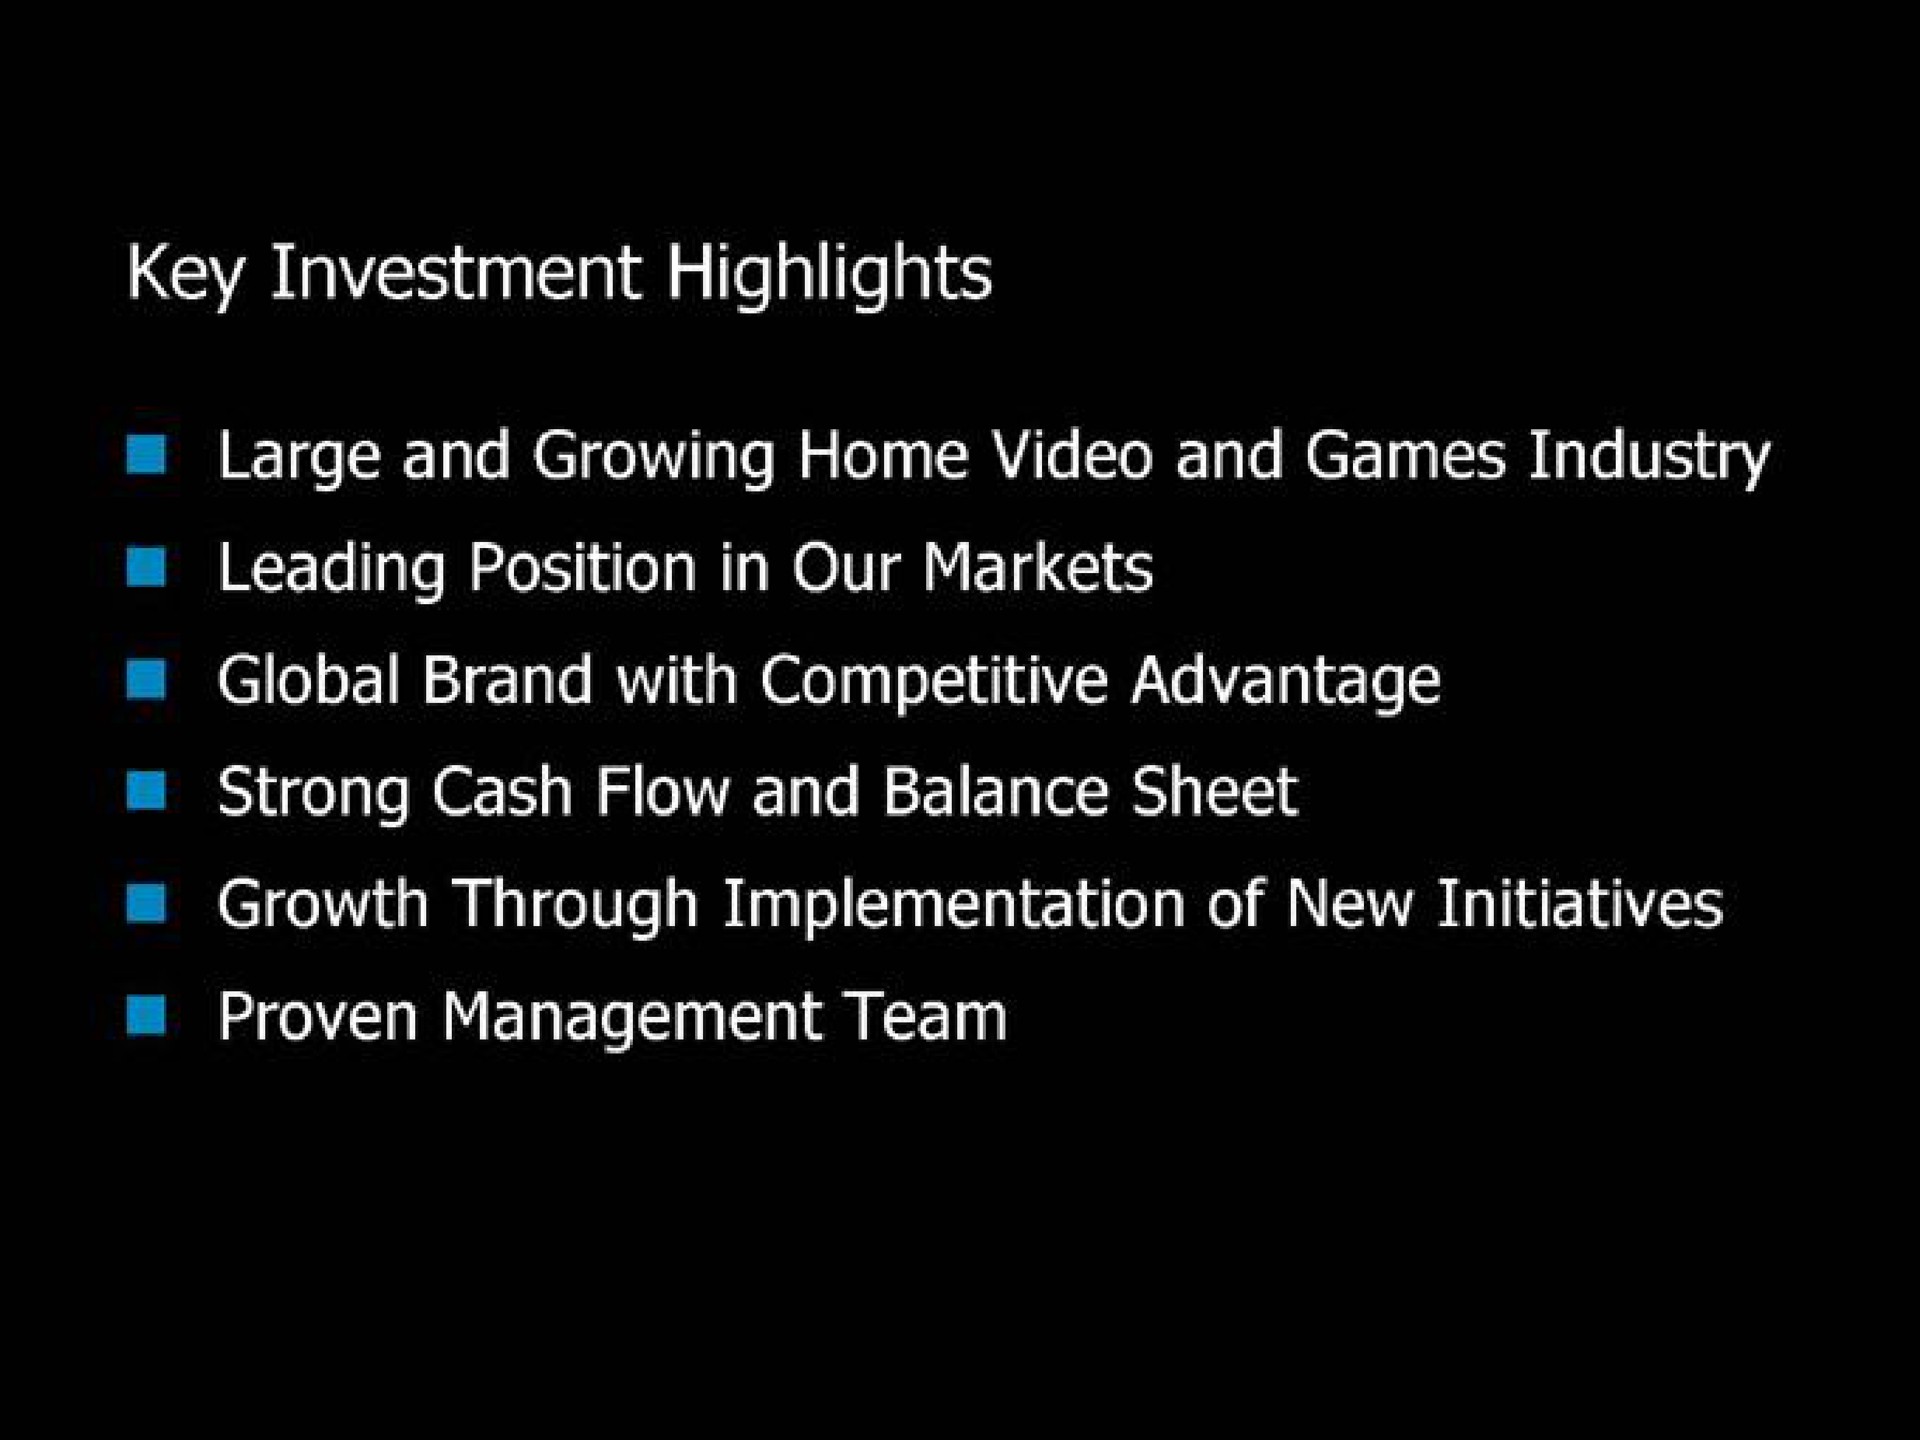 key investment highlights large and growing home video and games industry leading position in our markets growth through implementation of new initiatives | Blockbuster Video